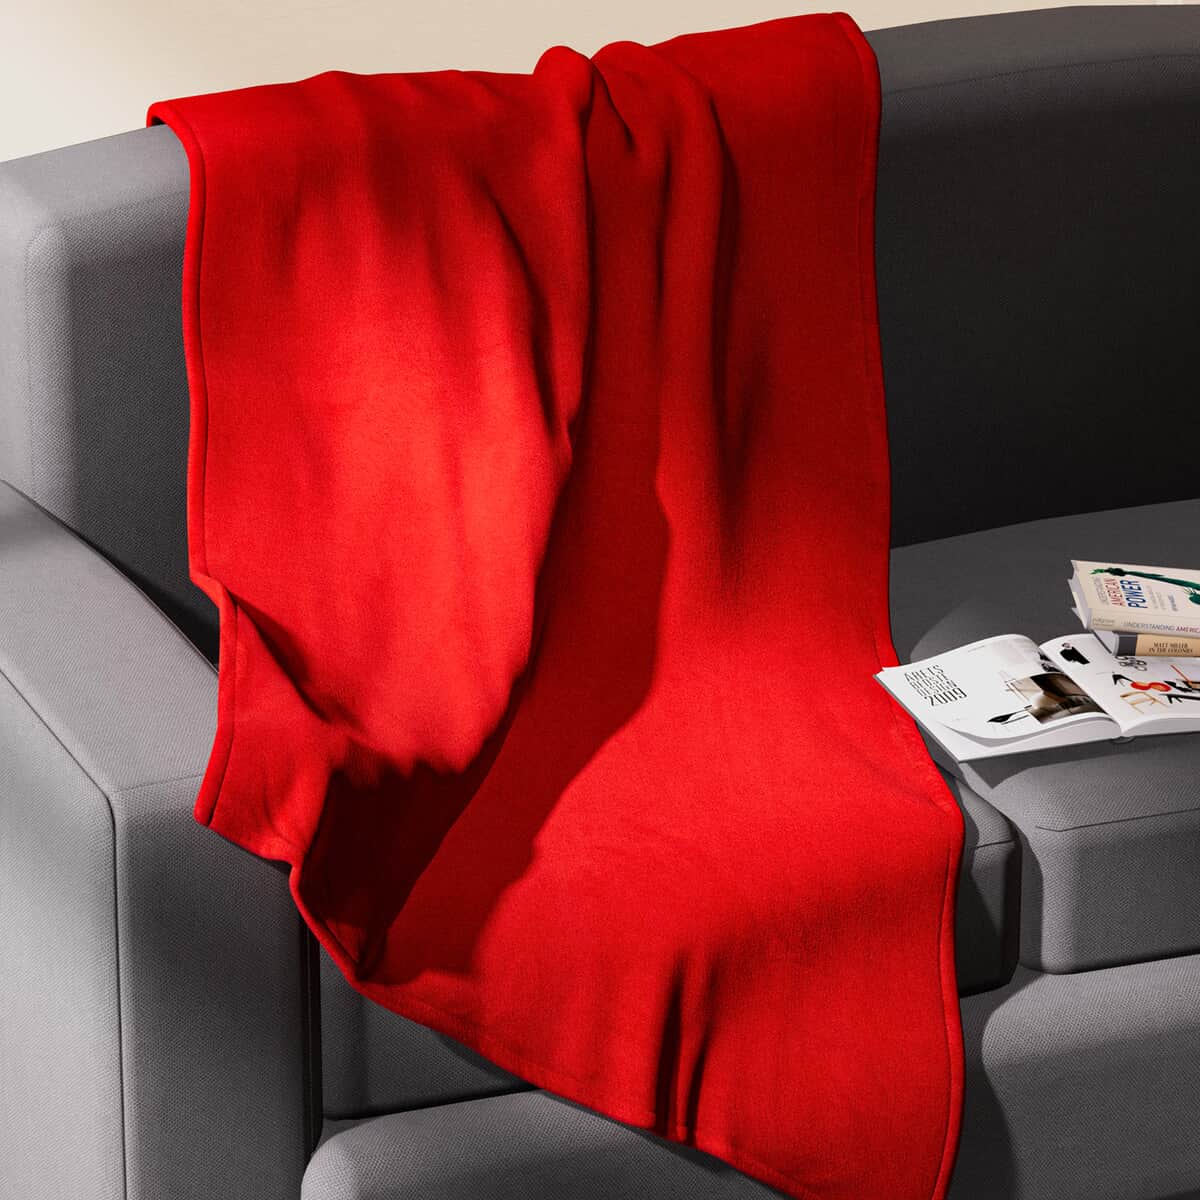 HOMESMART Toreador Solid Coral Fleece Warmth and Soft Blanket (50"x70") image number 1